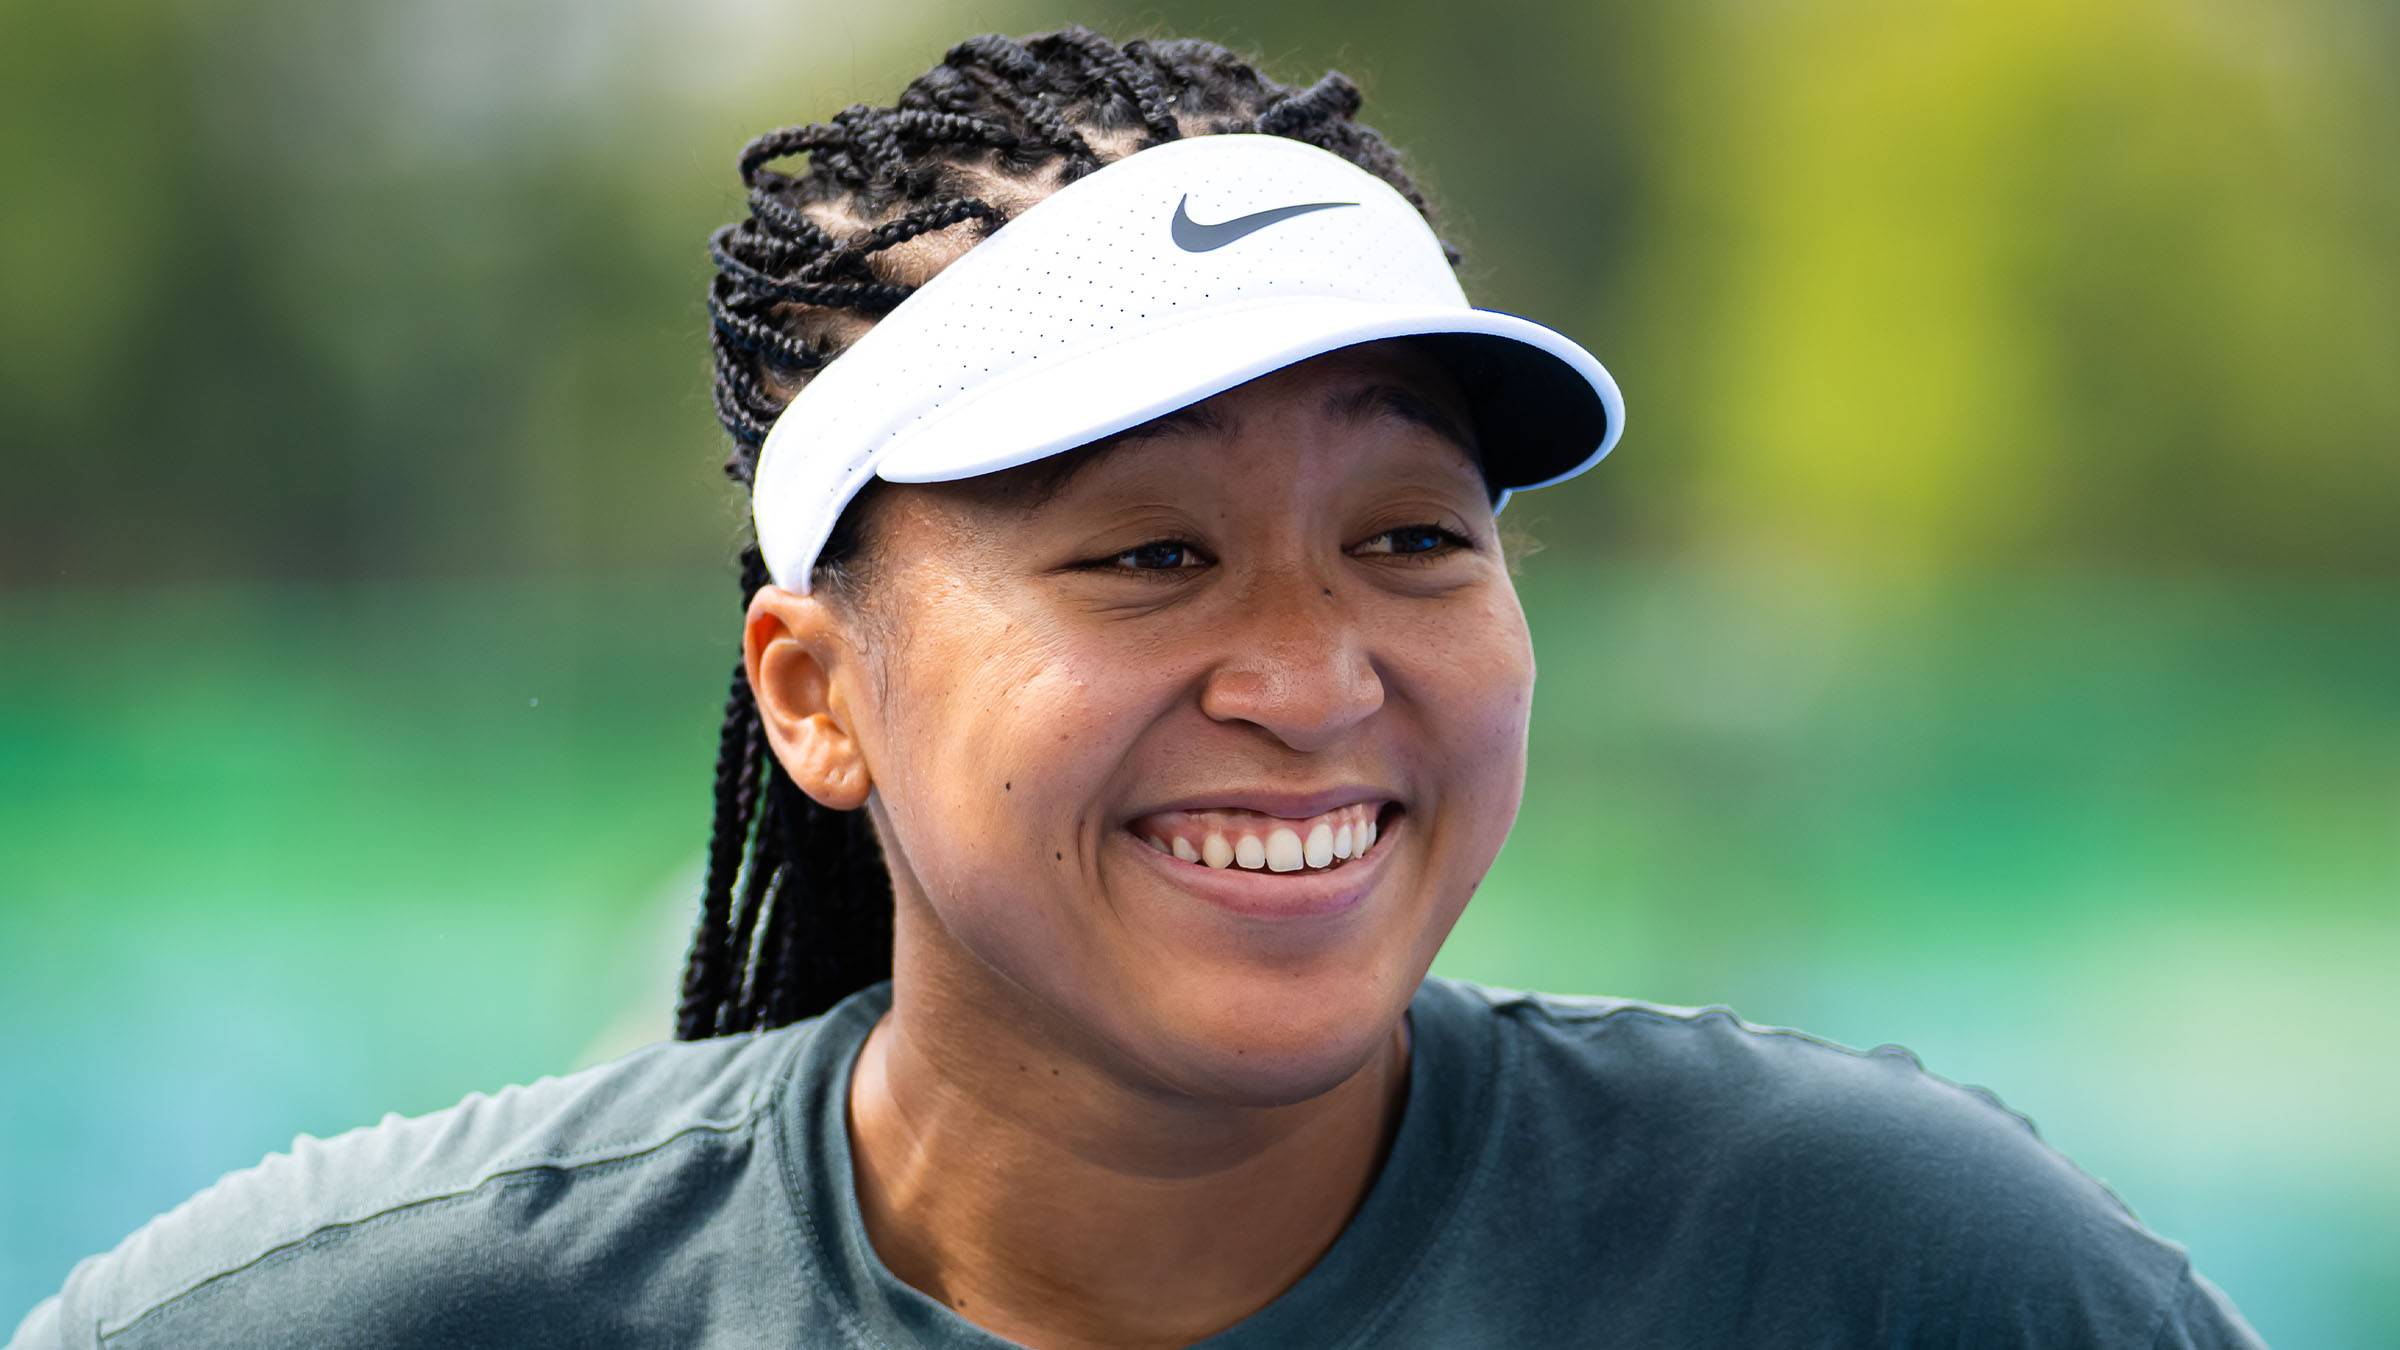 Naomi Osaka Shares Fitness Routine After Giving Birth to Baby Girl